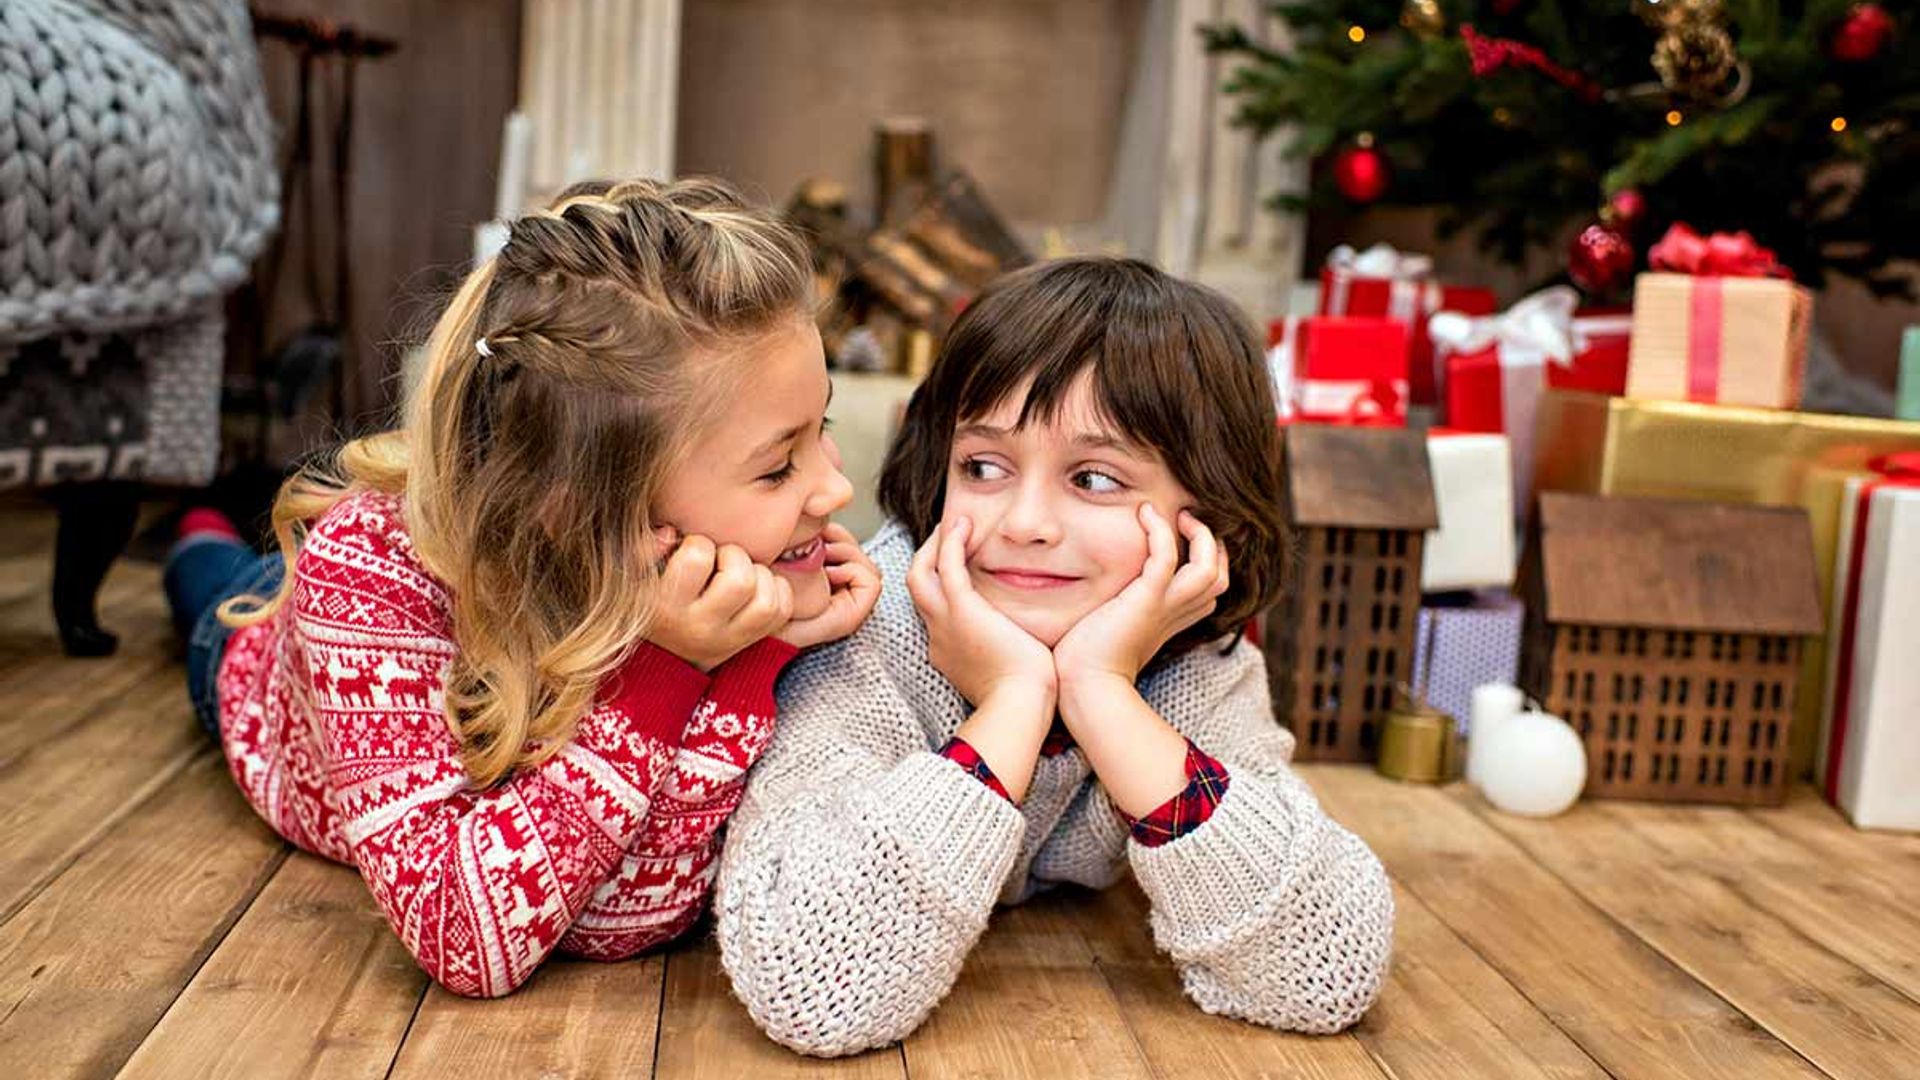 14 Christmas Gifts for Kids That'll Bring Them Wonder and Joy